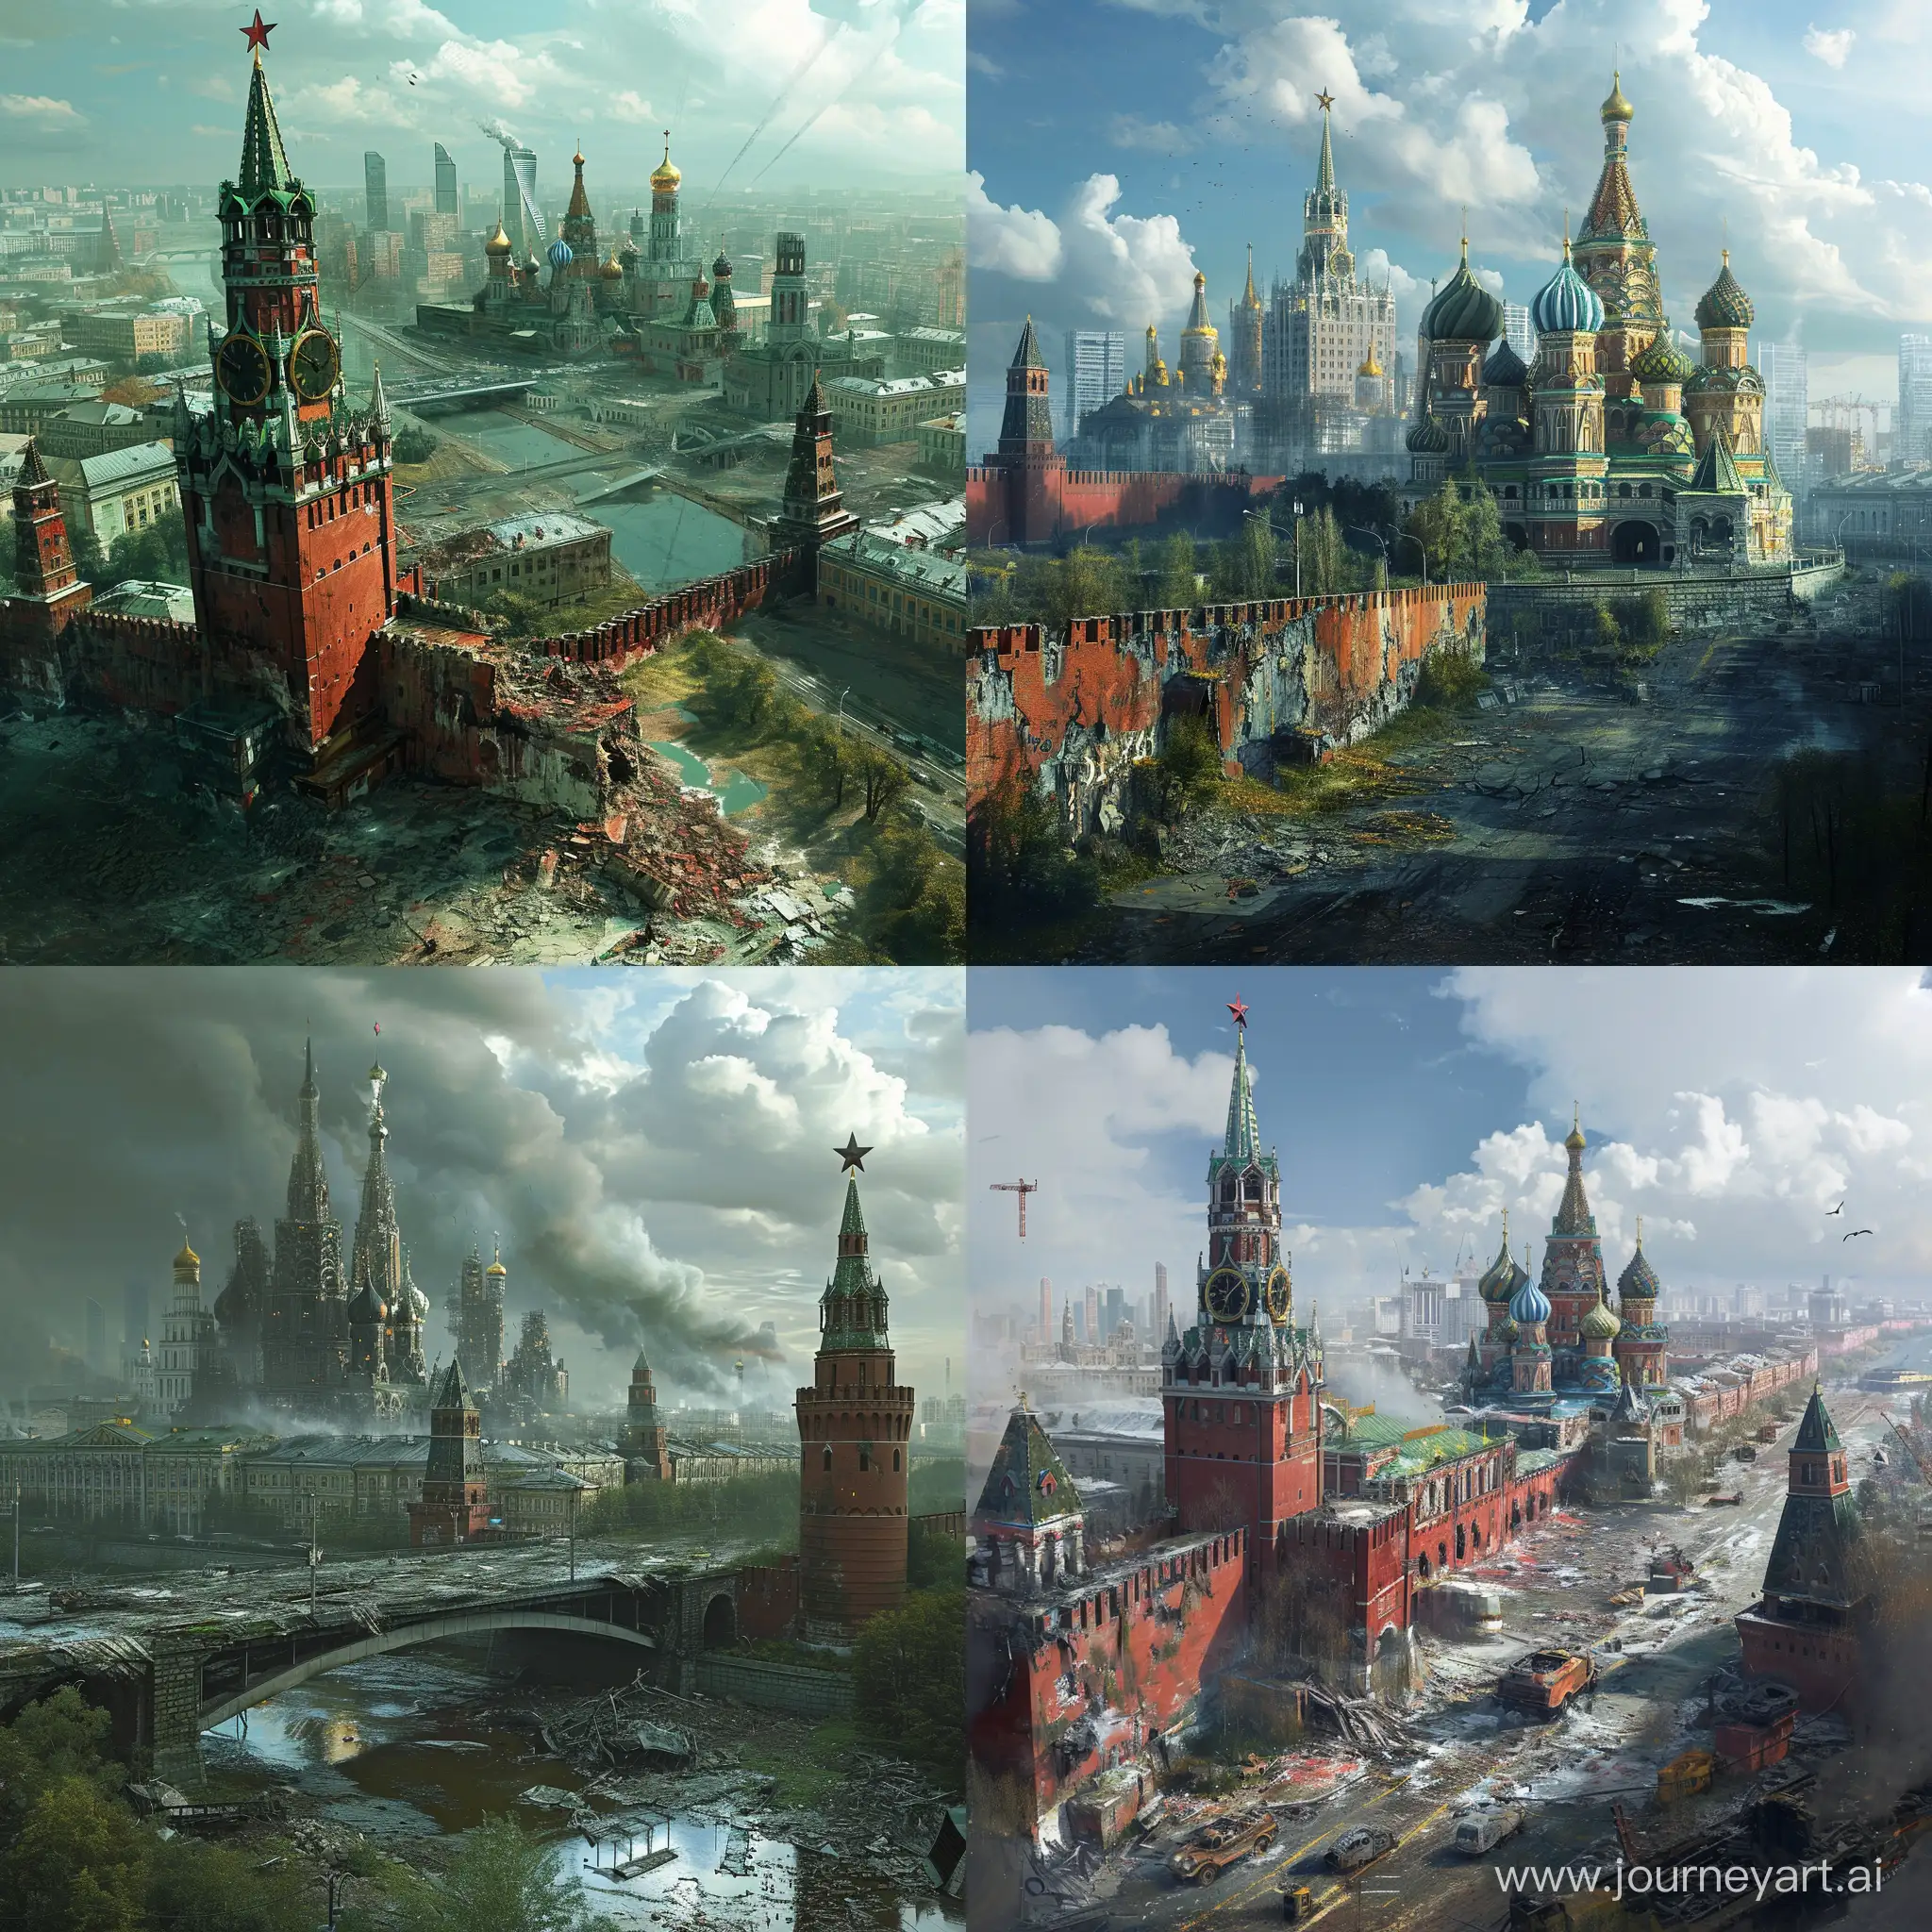 Futuristic-Moscow-in-PostApocalyptic-Style-HighTech-Fantasy-Cityscape